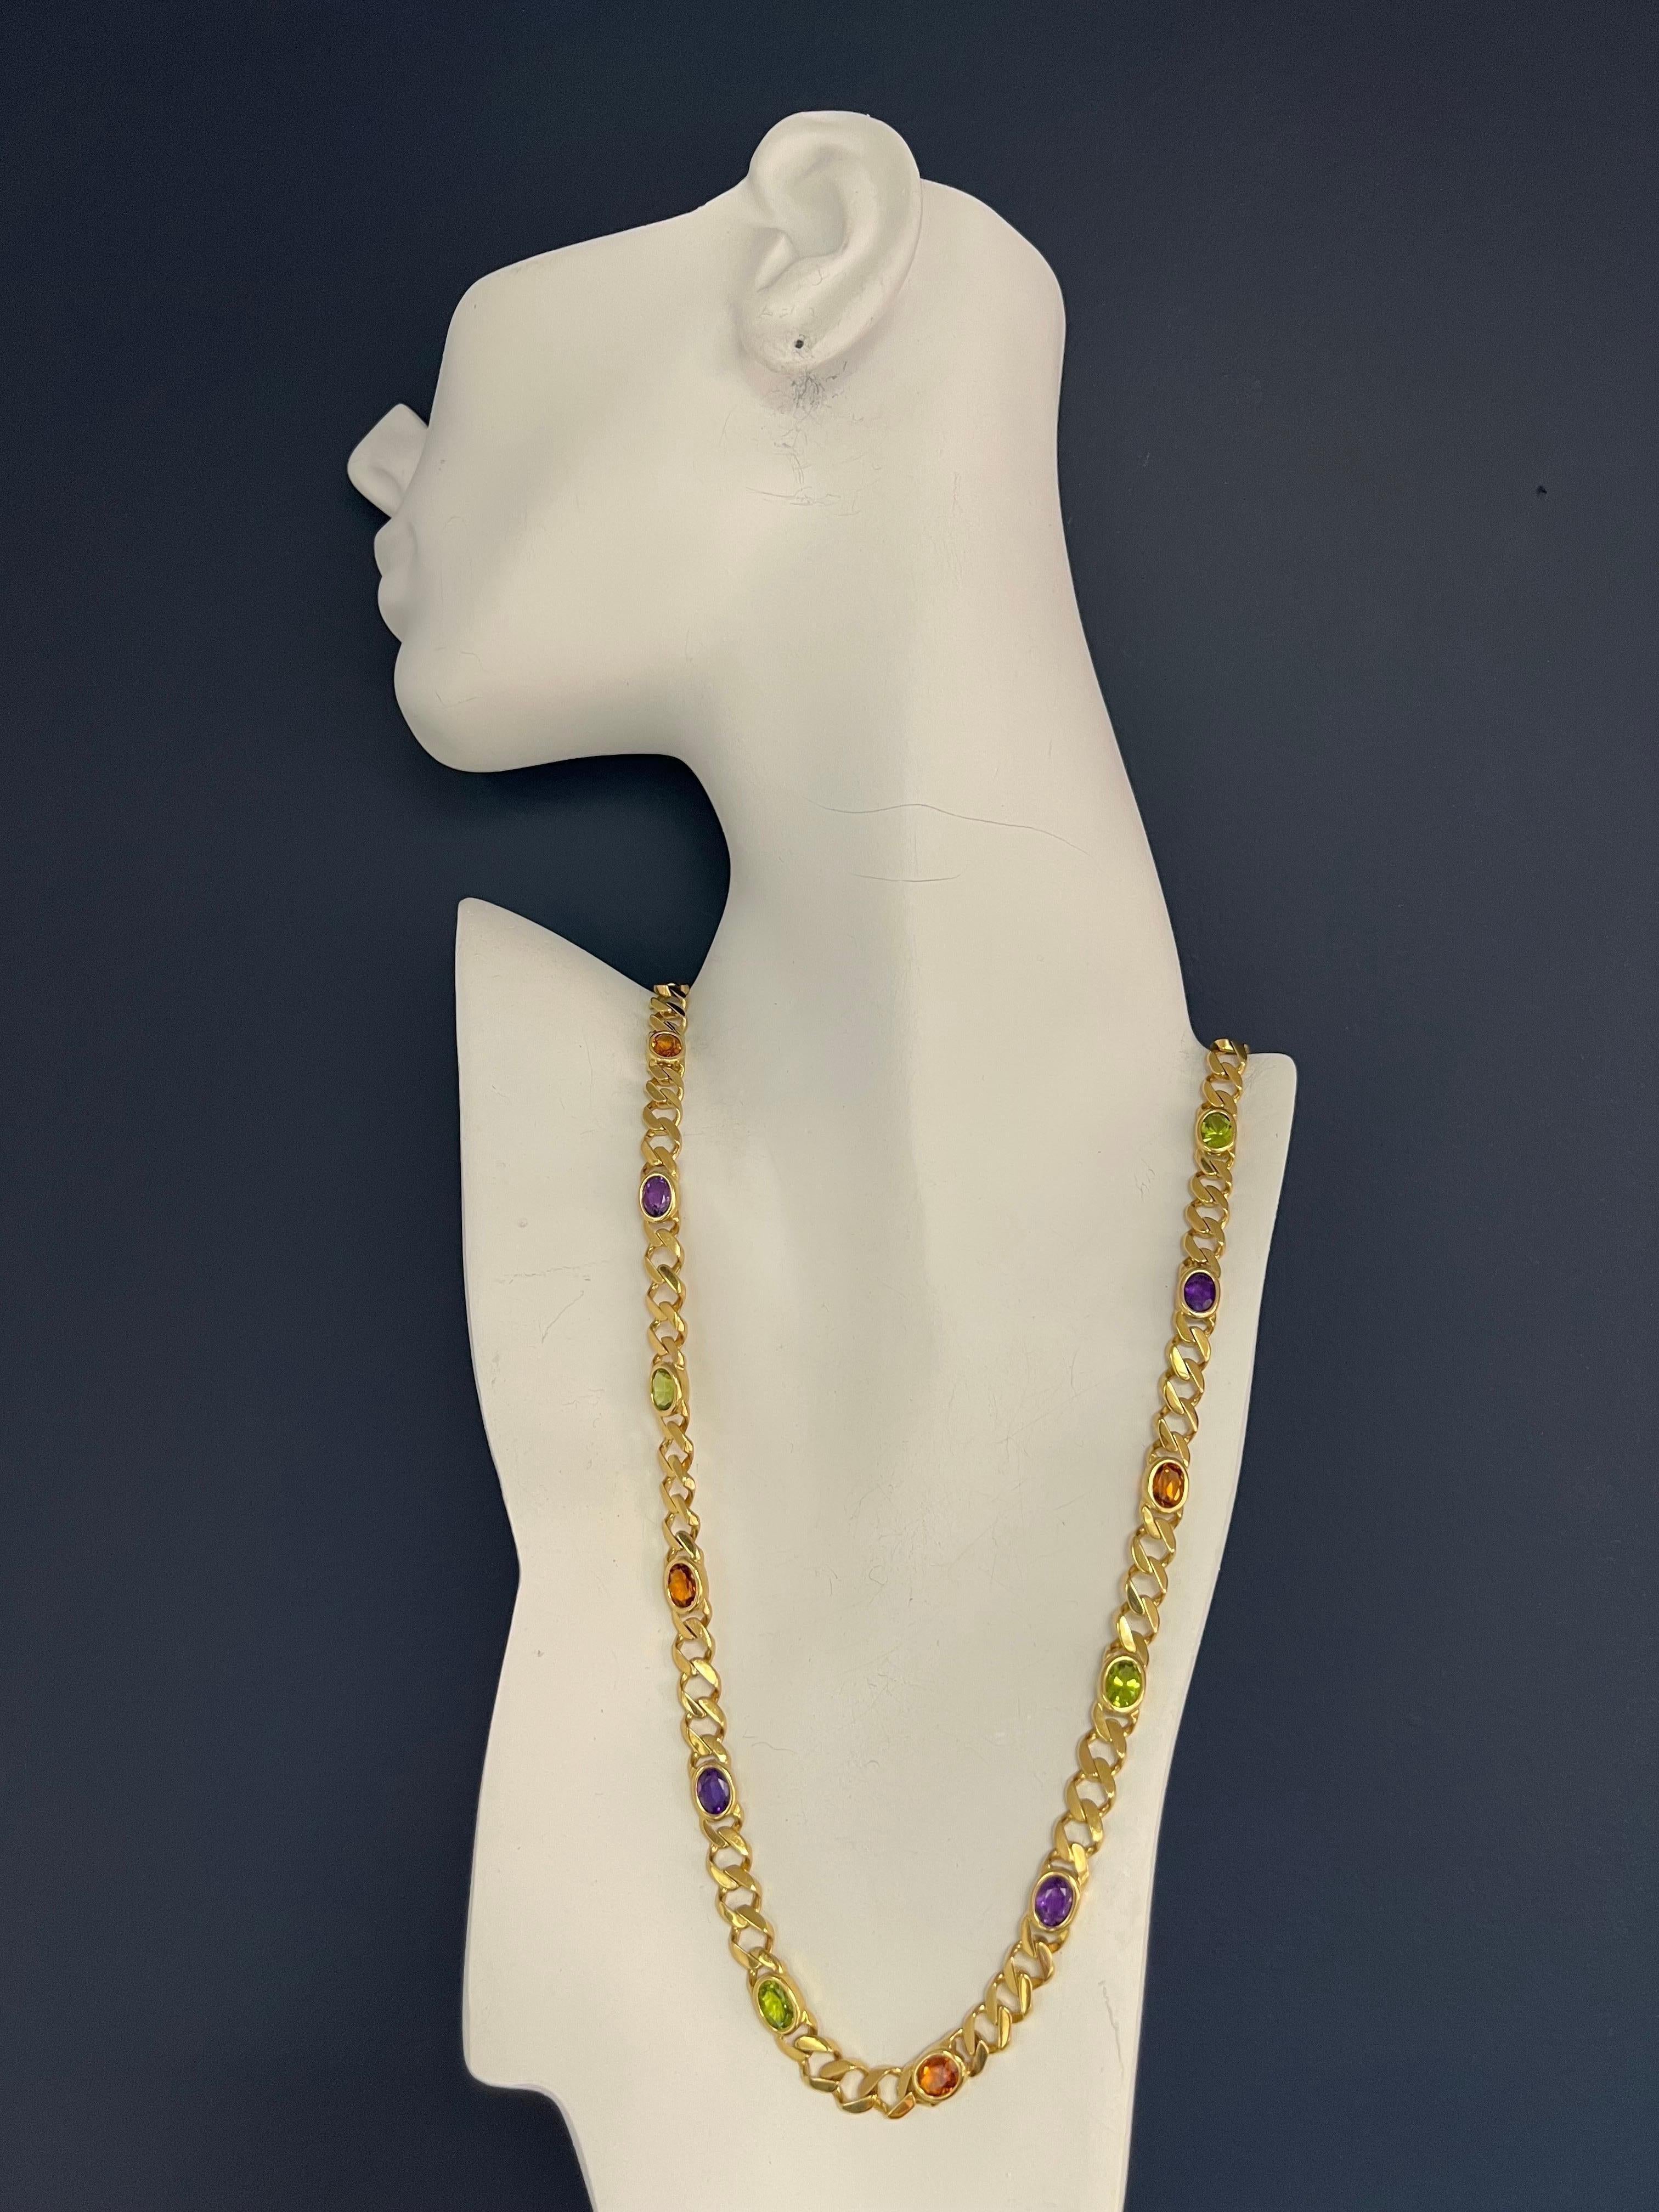 Magnificent Retro 14k Yellow Gold Necklace & Bracelet SET. The piece is set with 26 carats (approximate) of oval citrine, amethyst, and peridots. Circa 1980.

The Necklace is 24